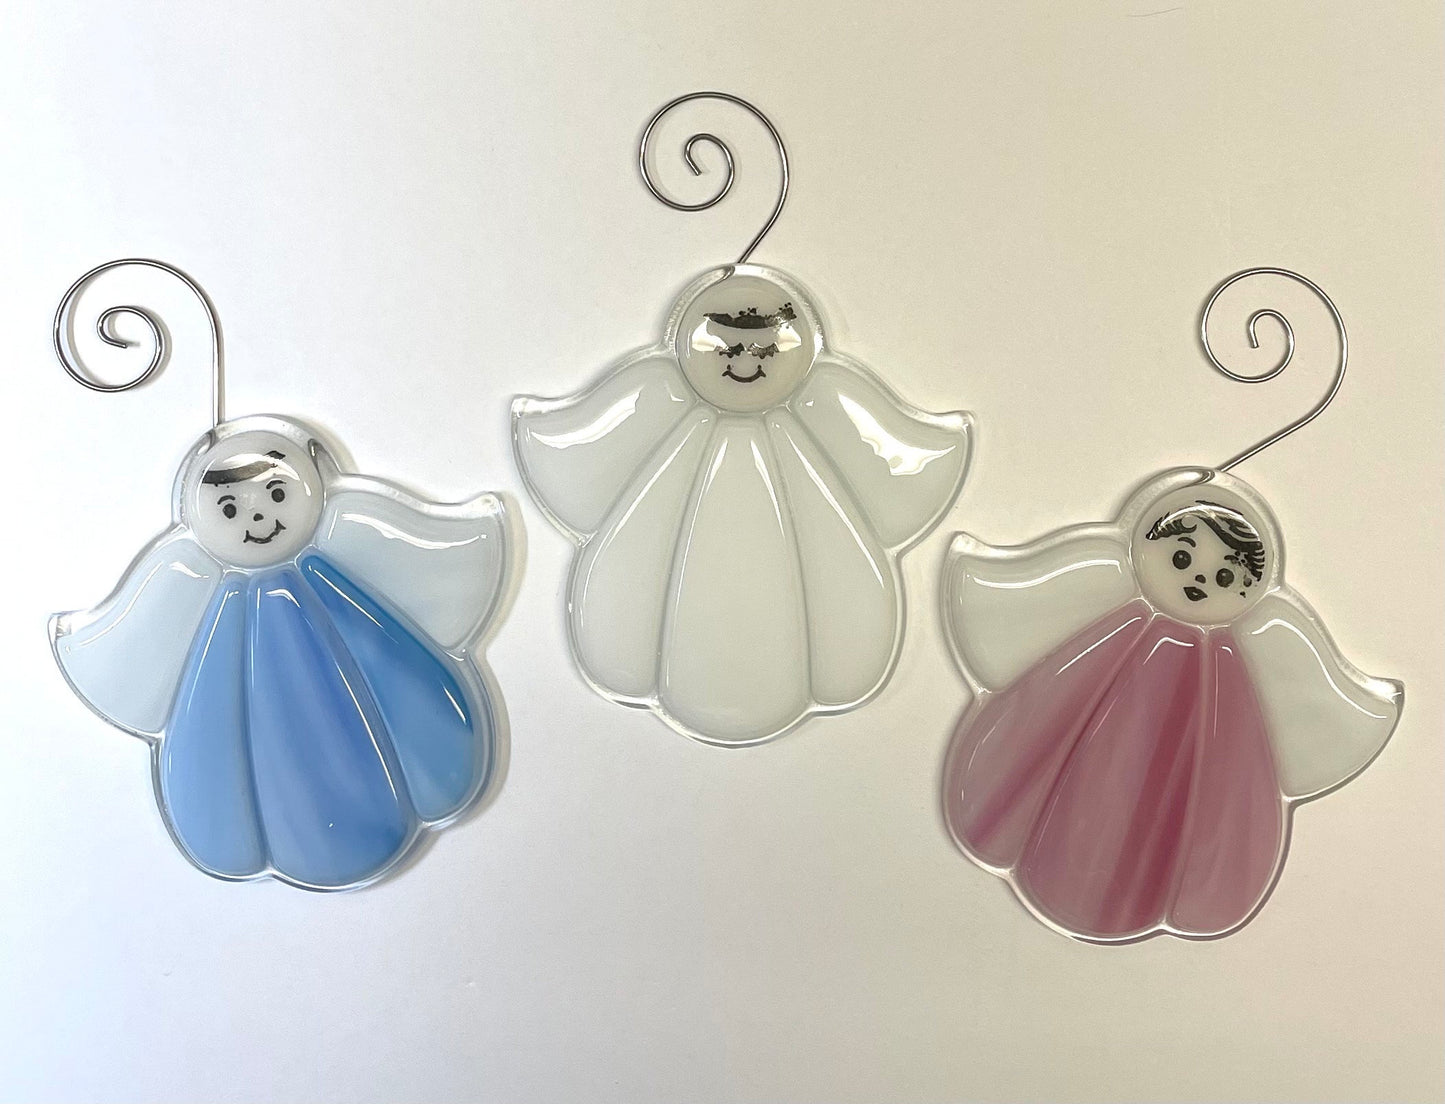 Angels with Face Detail Fused Glass Ornaments